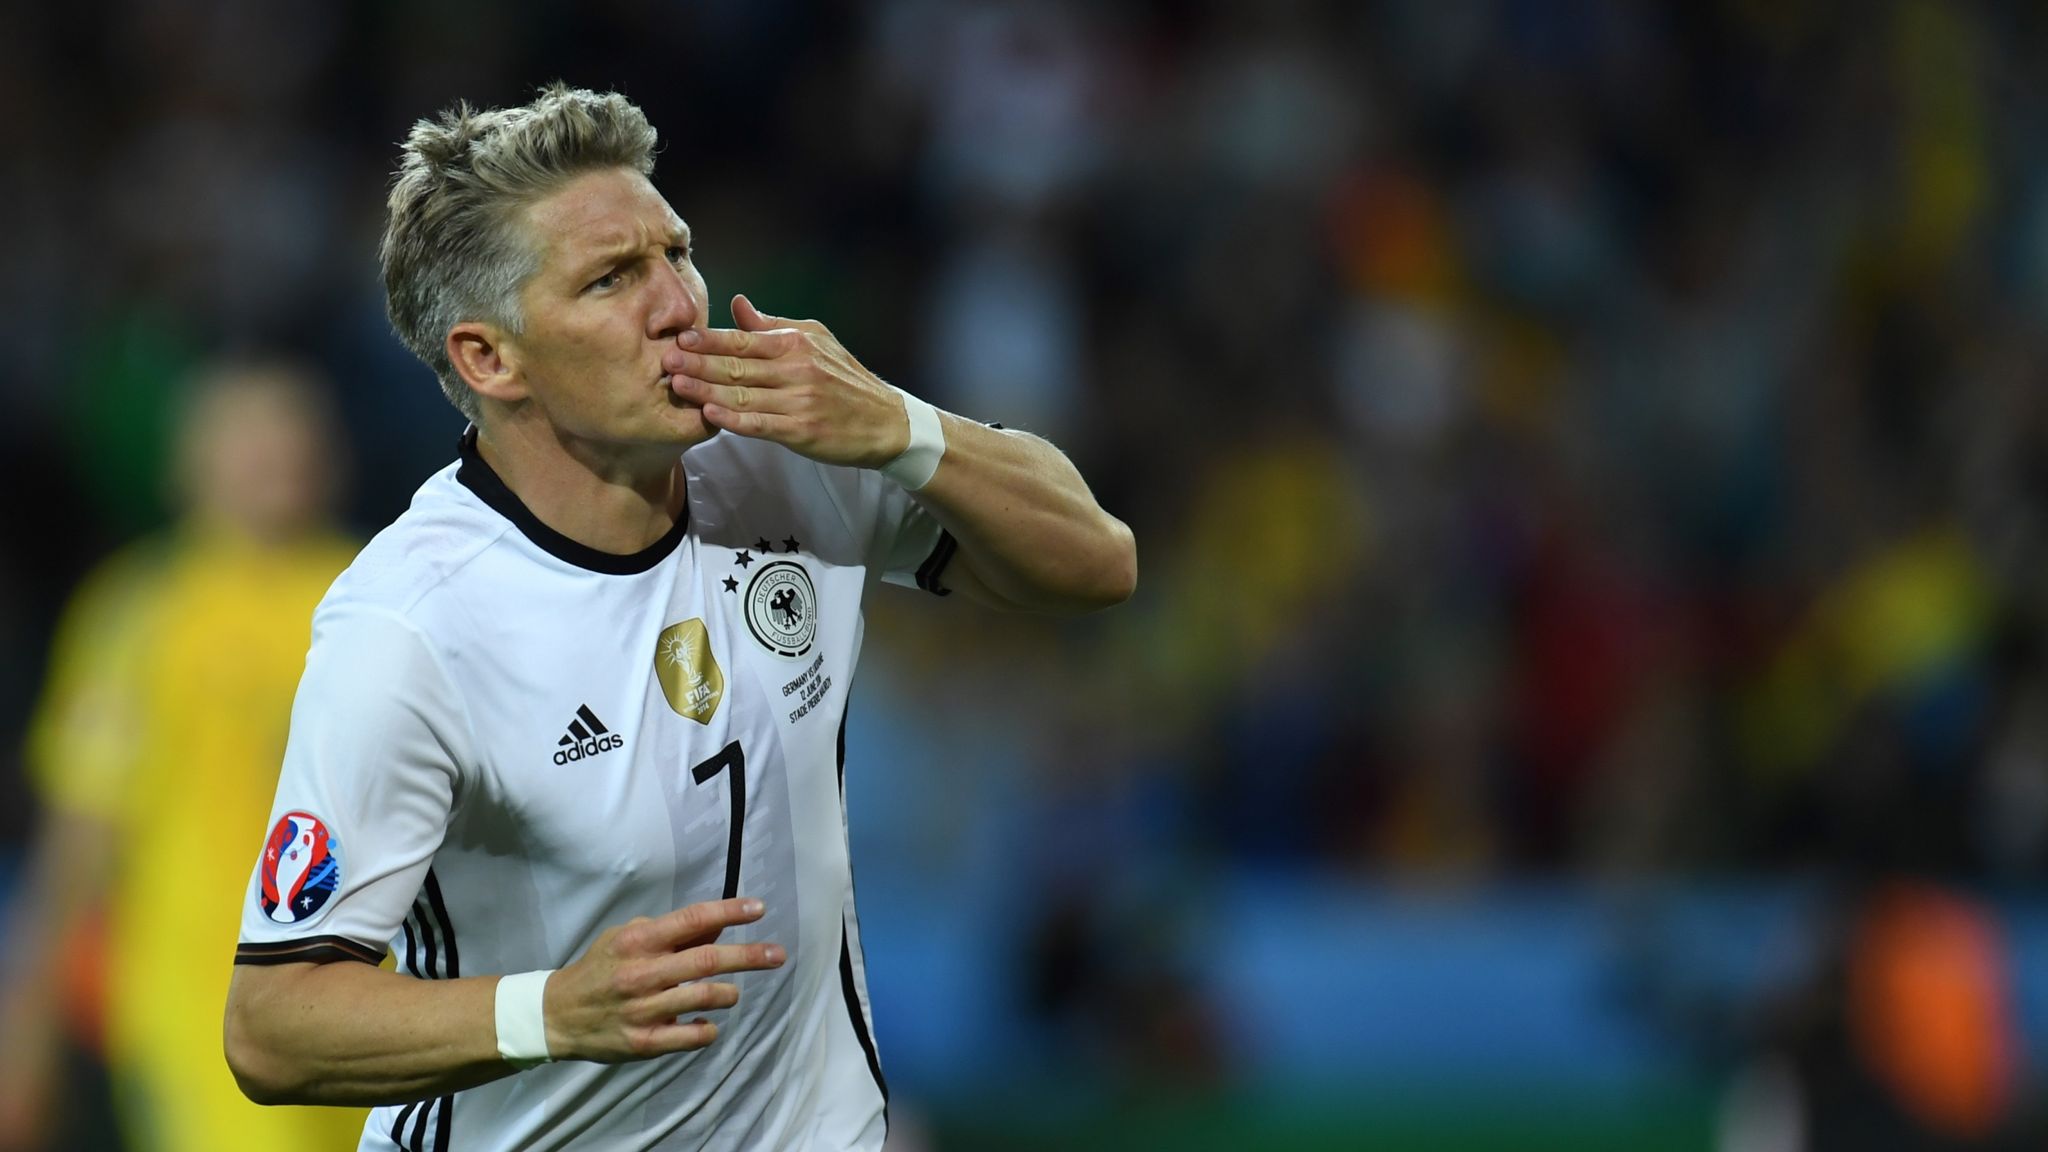 Bastian Schweinsteiger to play one last game for Germany | Football